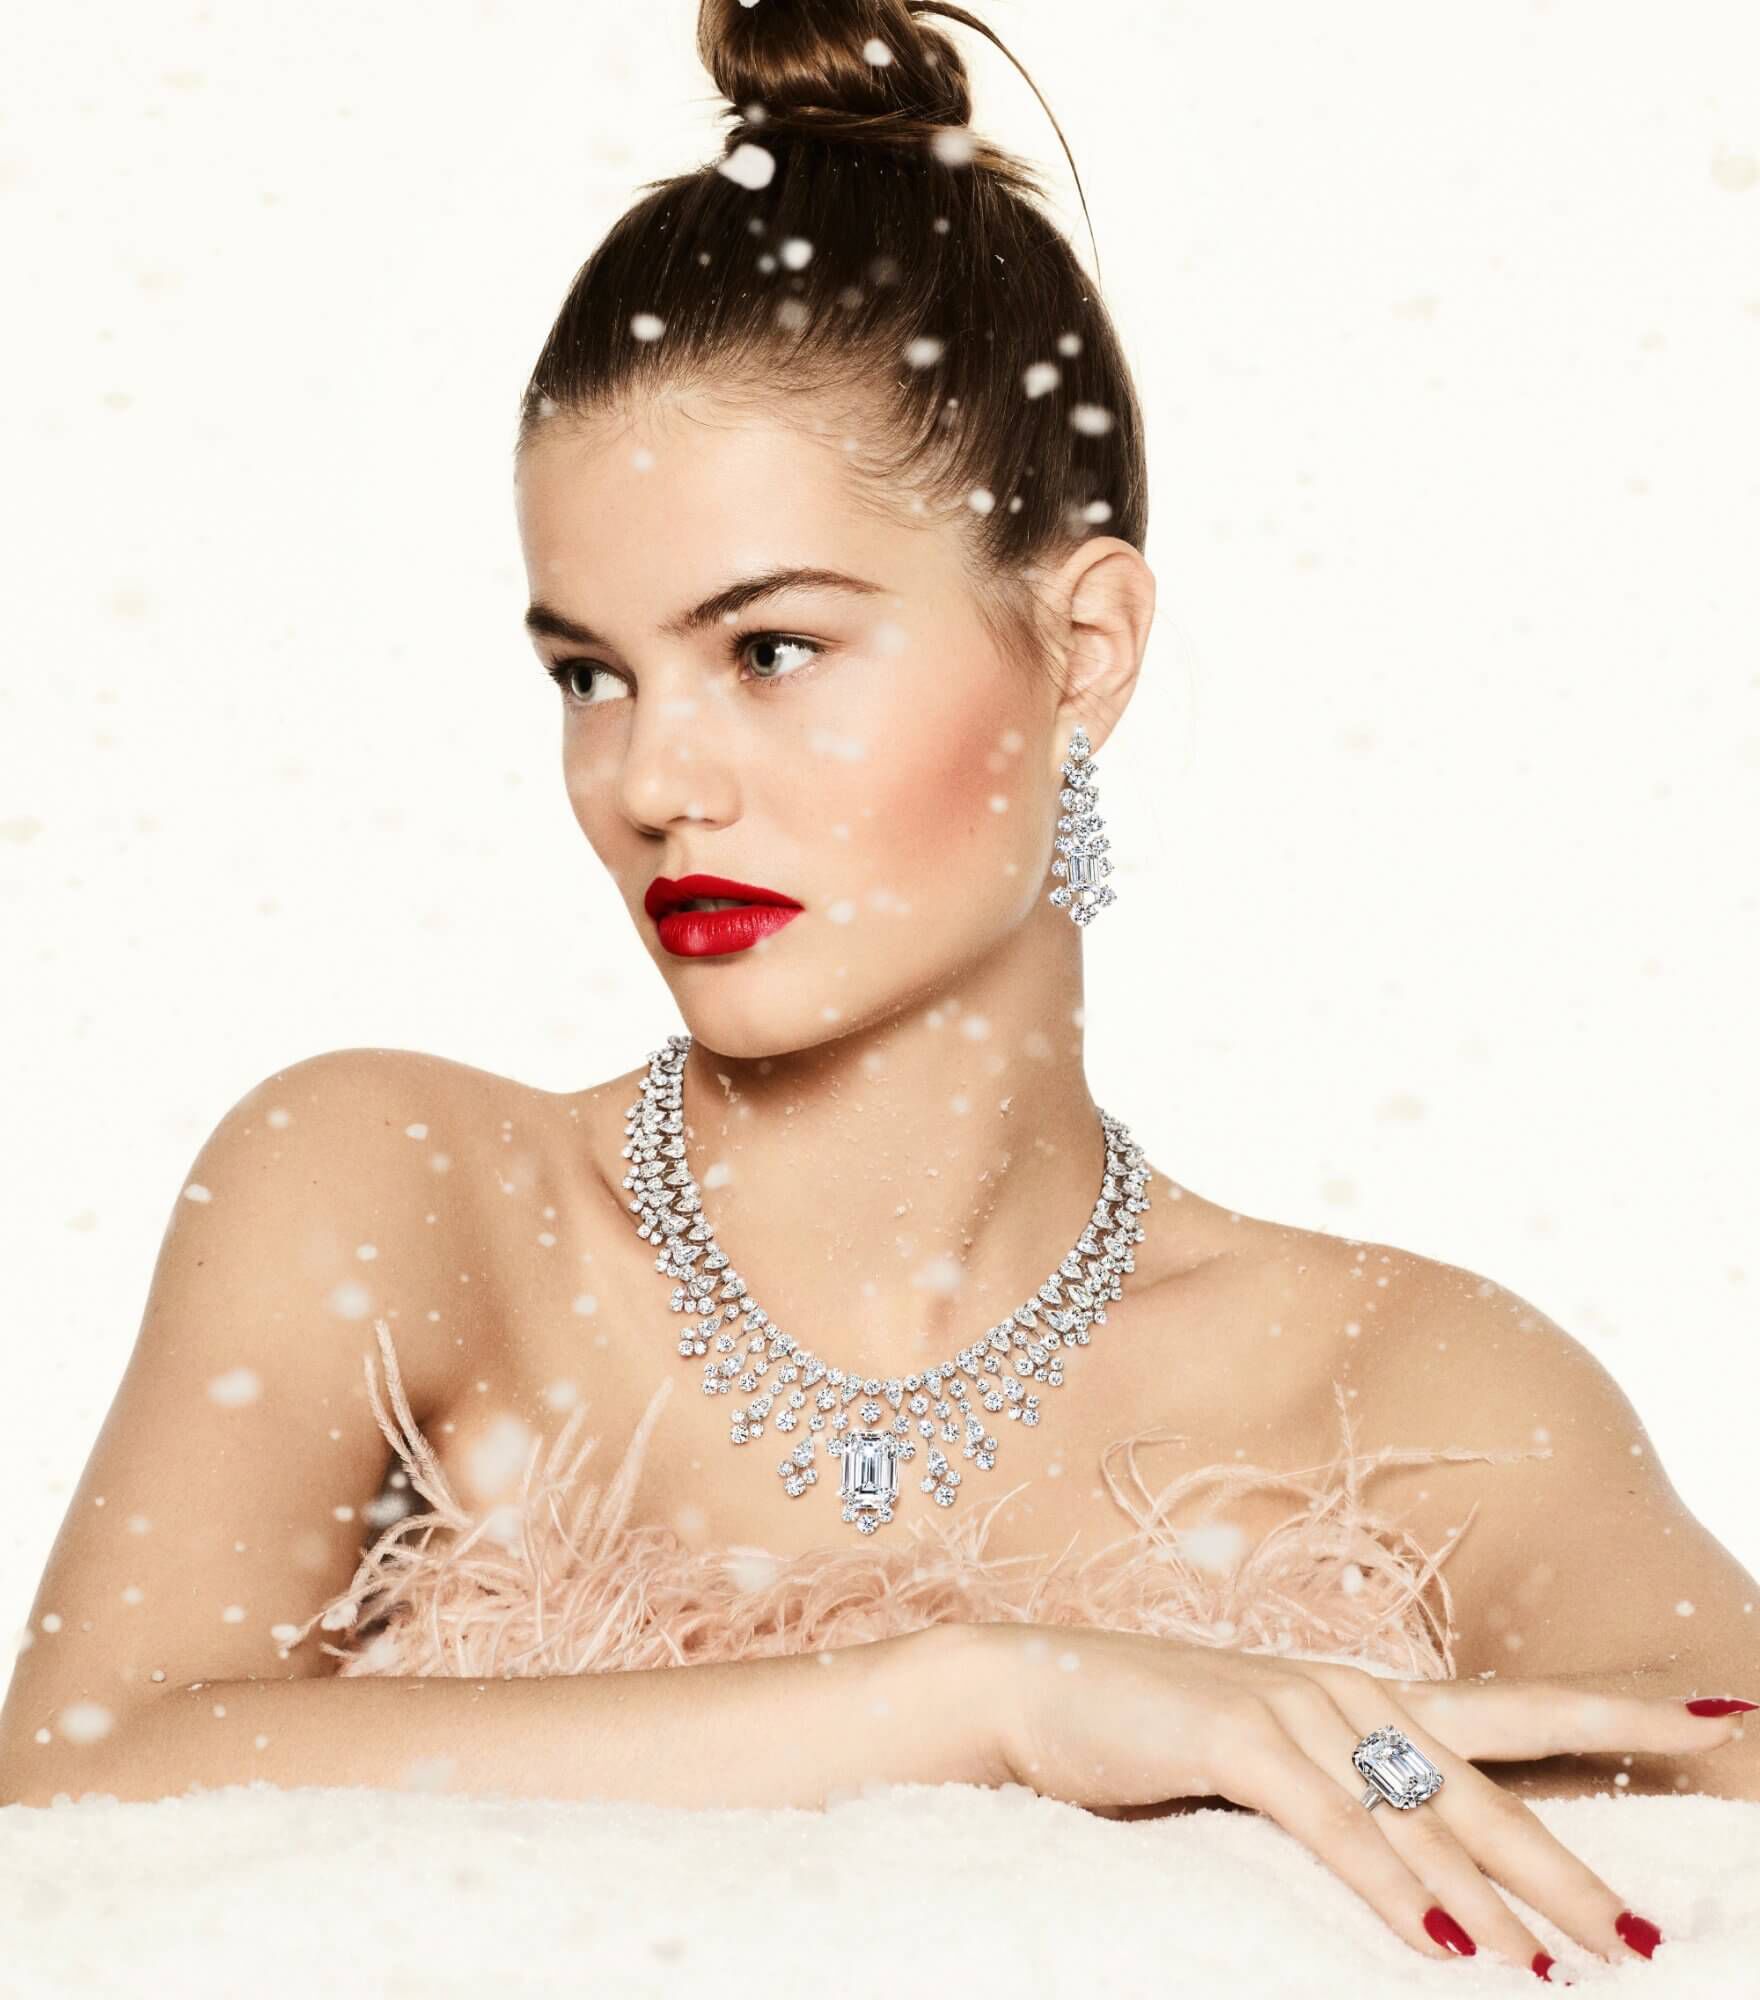 Model wearing Graff high jewellery diamond necklace, earrings and ring